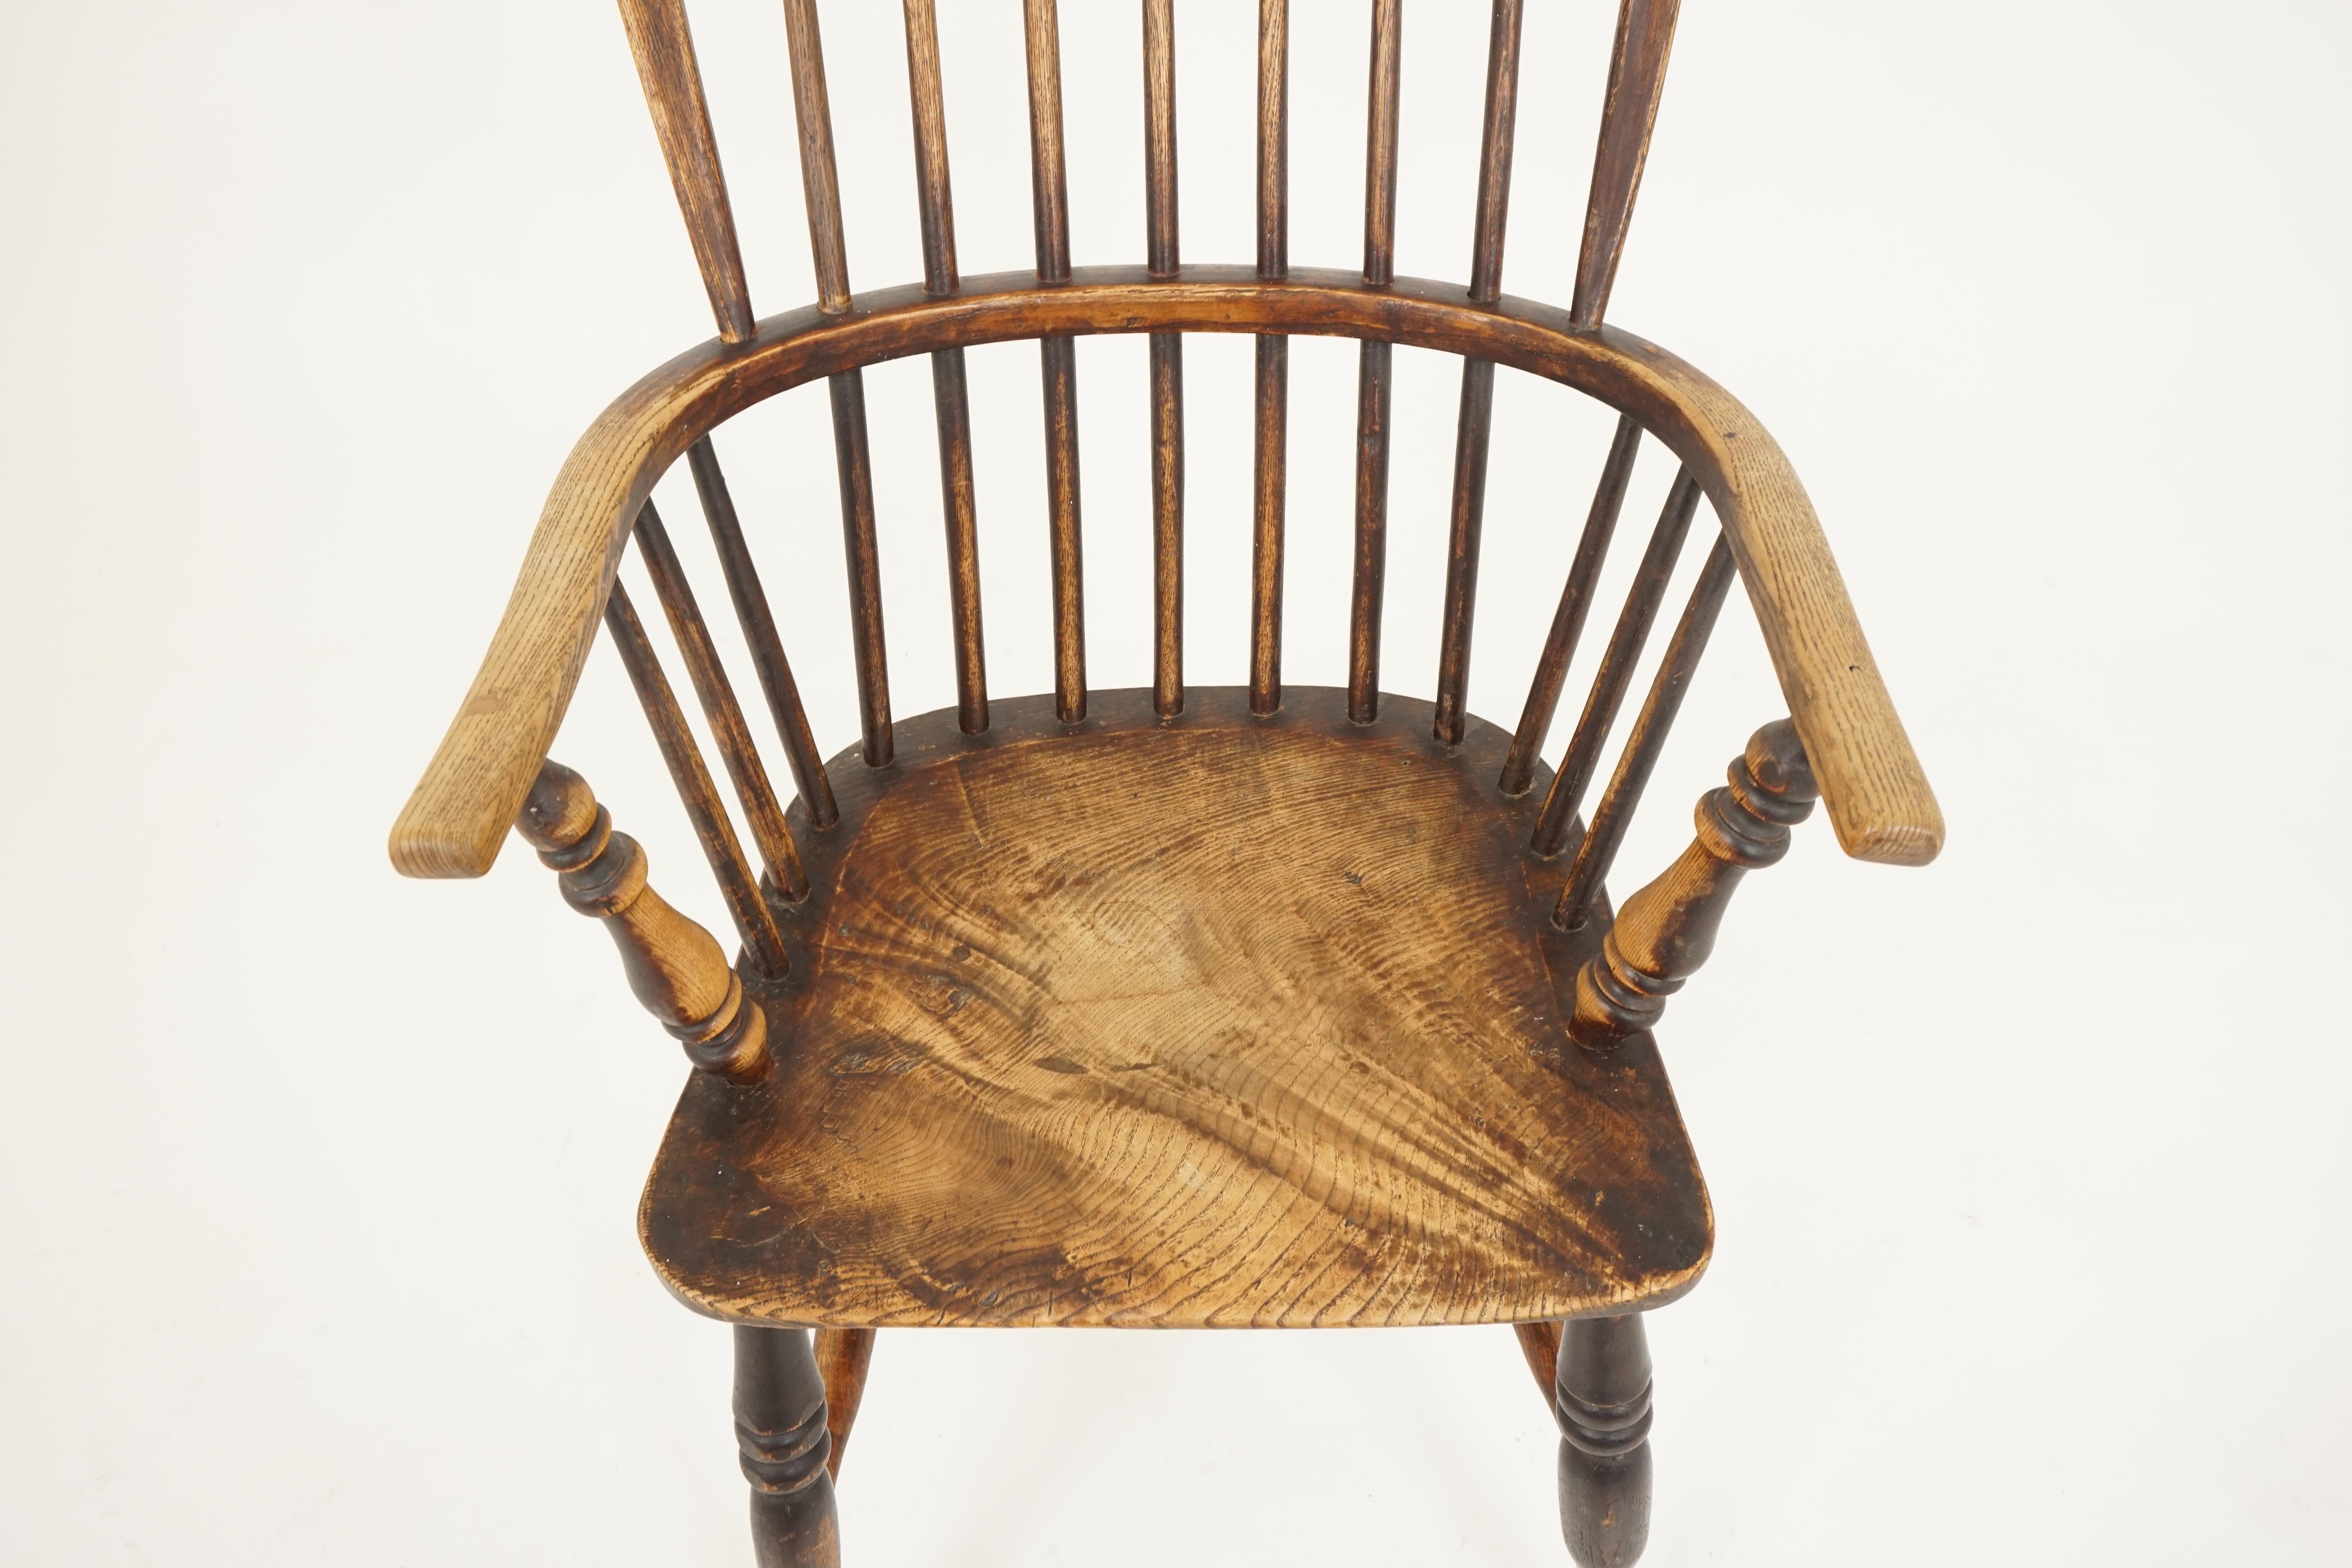 Hand-Crafted Antique Victorian Chair, Ash + Elm, Windsor Arm Chair, Scotland 1840